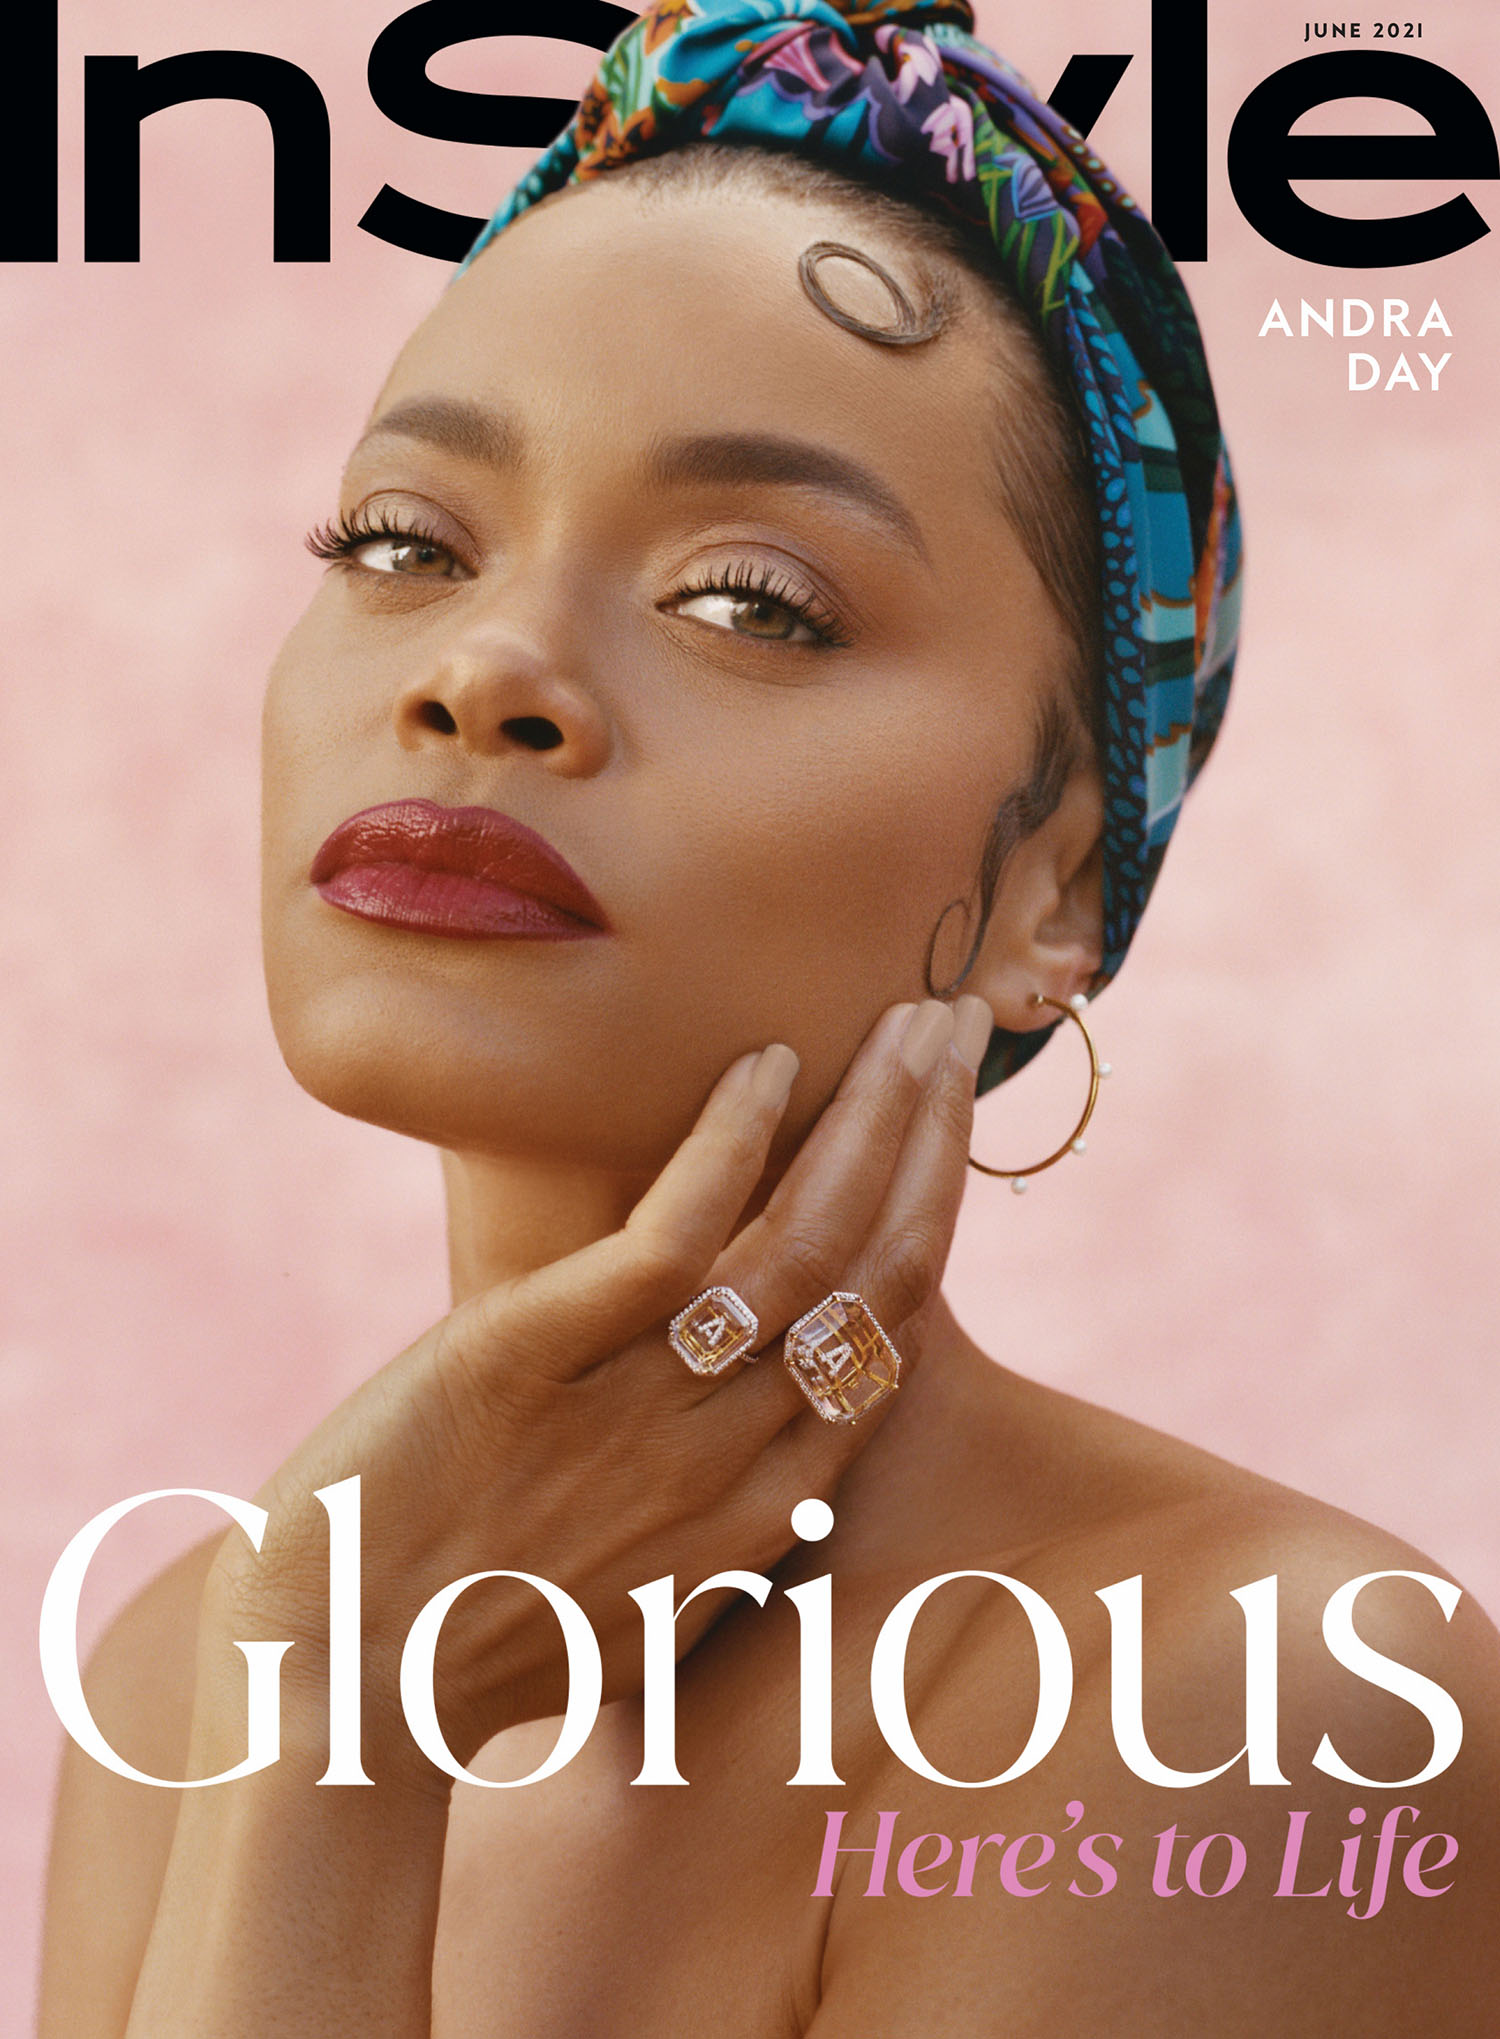 Andra Day covers InStyle US June 2021 by Chrisean Rose